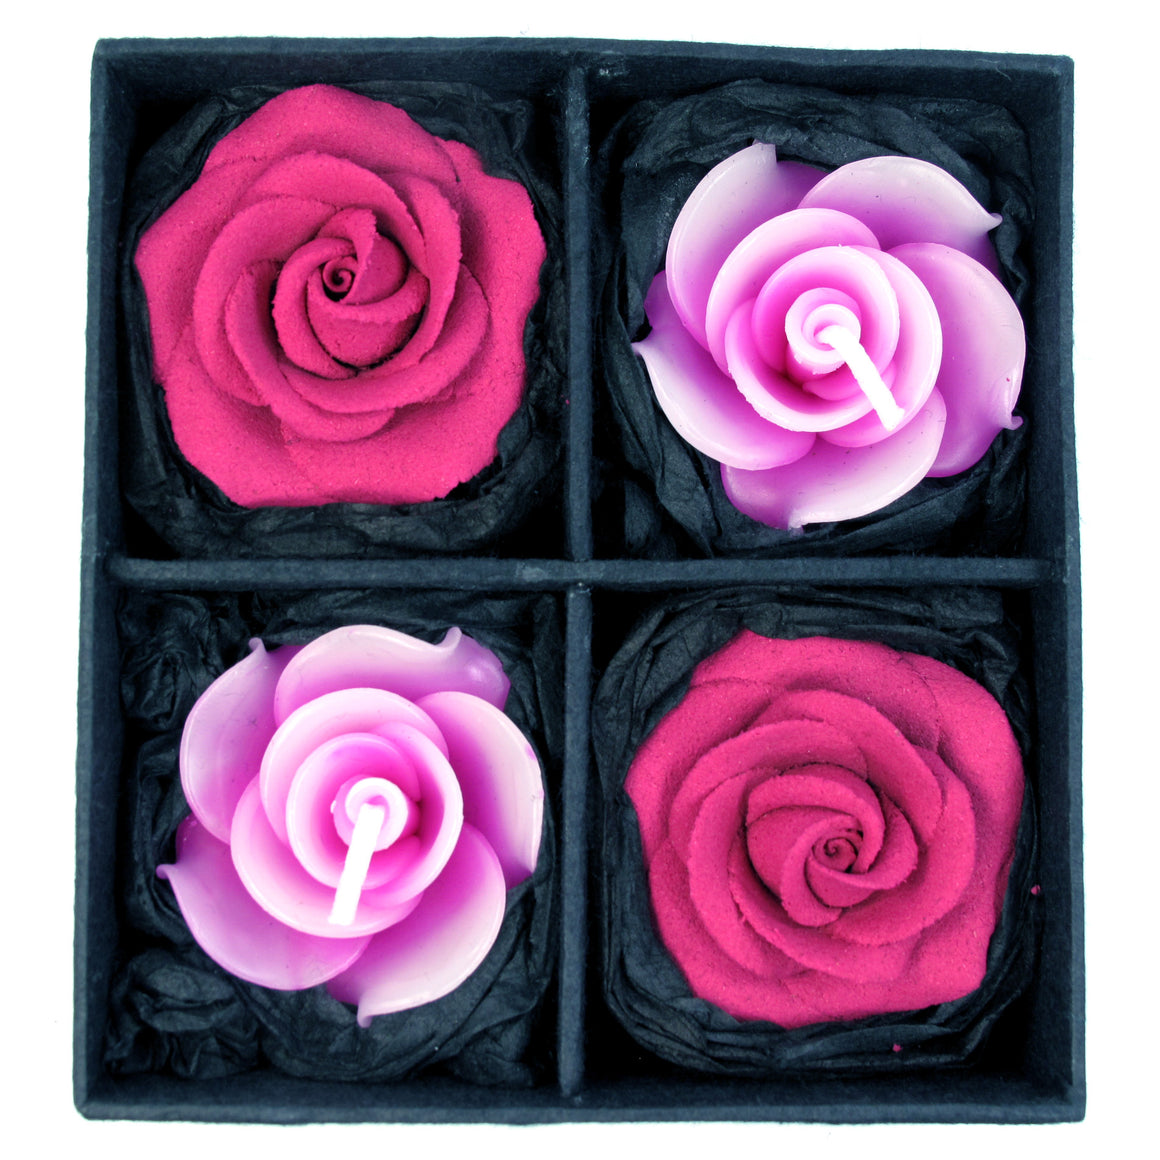 Rose Incense & Candle Gift Set, Pink - Great for Space Clearing (Clearing & Revitalizing Energies in Buildings) - TropicaZona